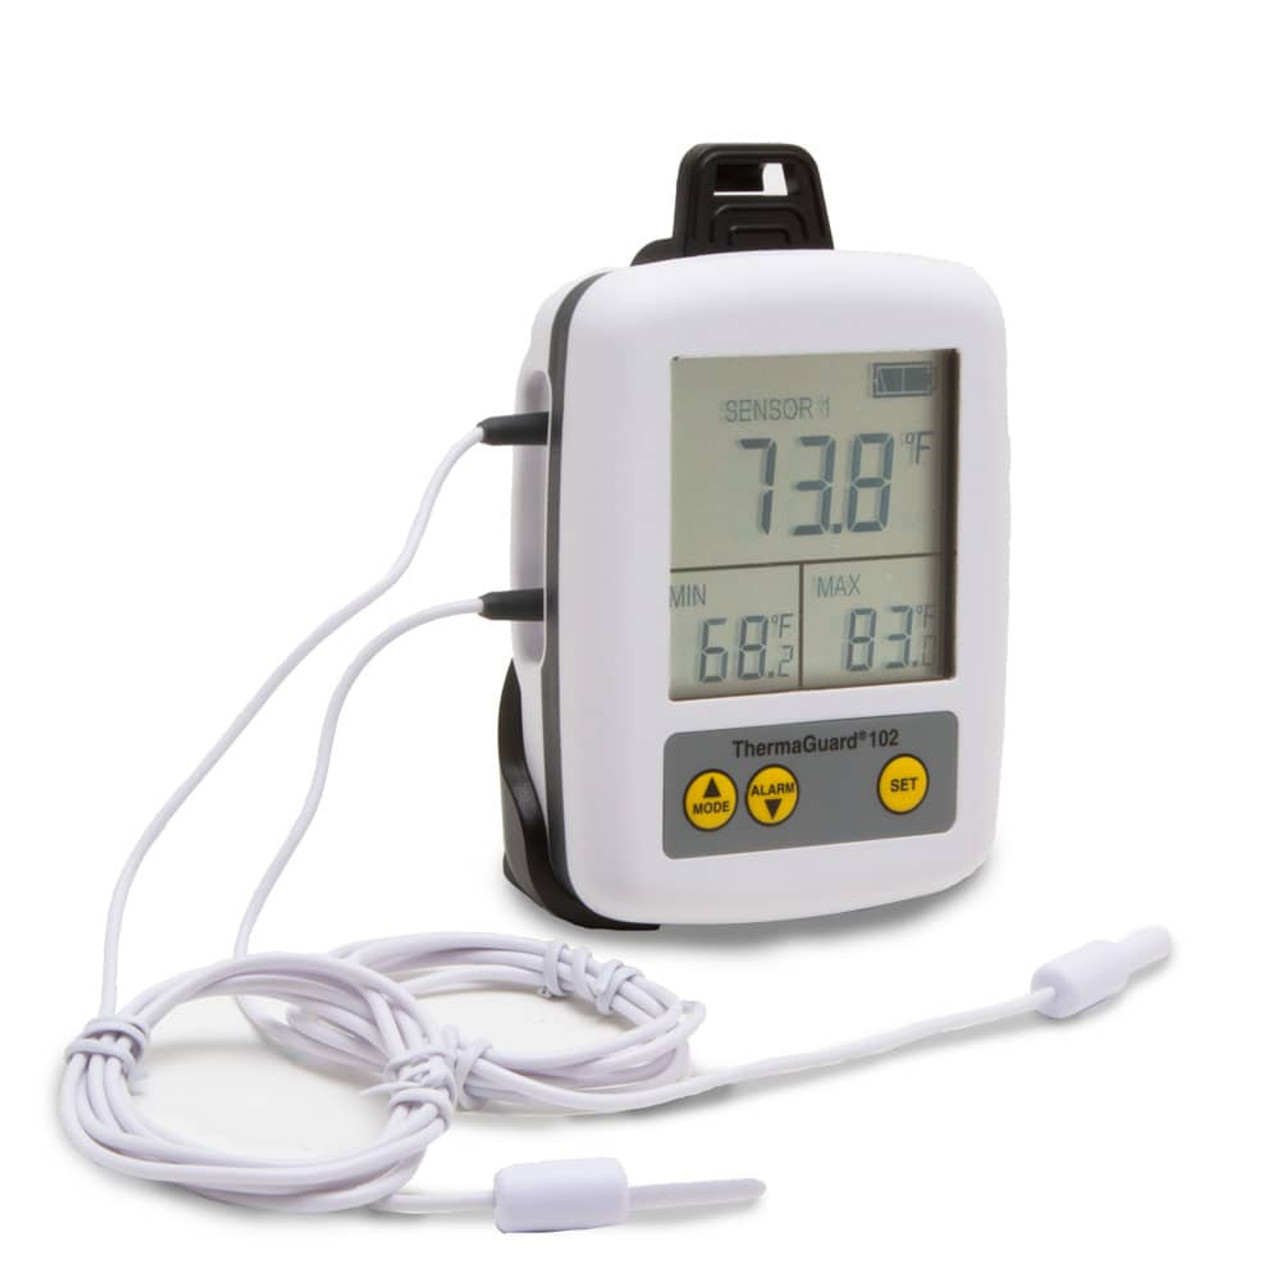 THE-372 Wireless Meat Thermometer for Remote Monitoring - Bluetooth Me